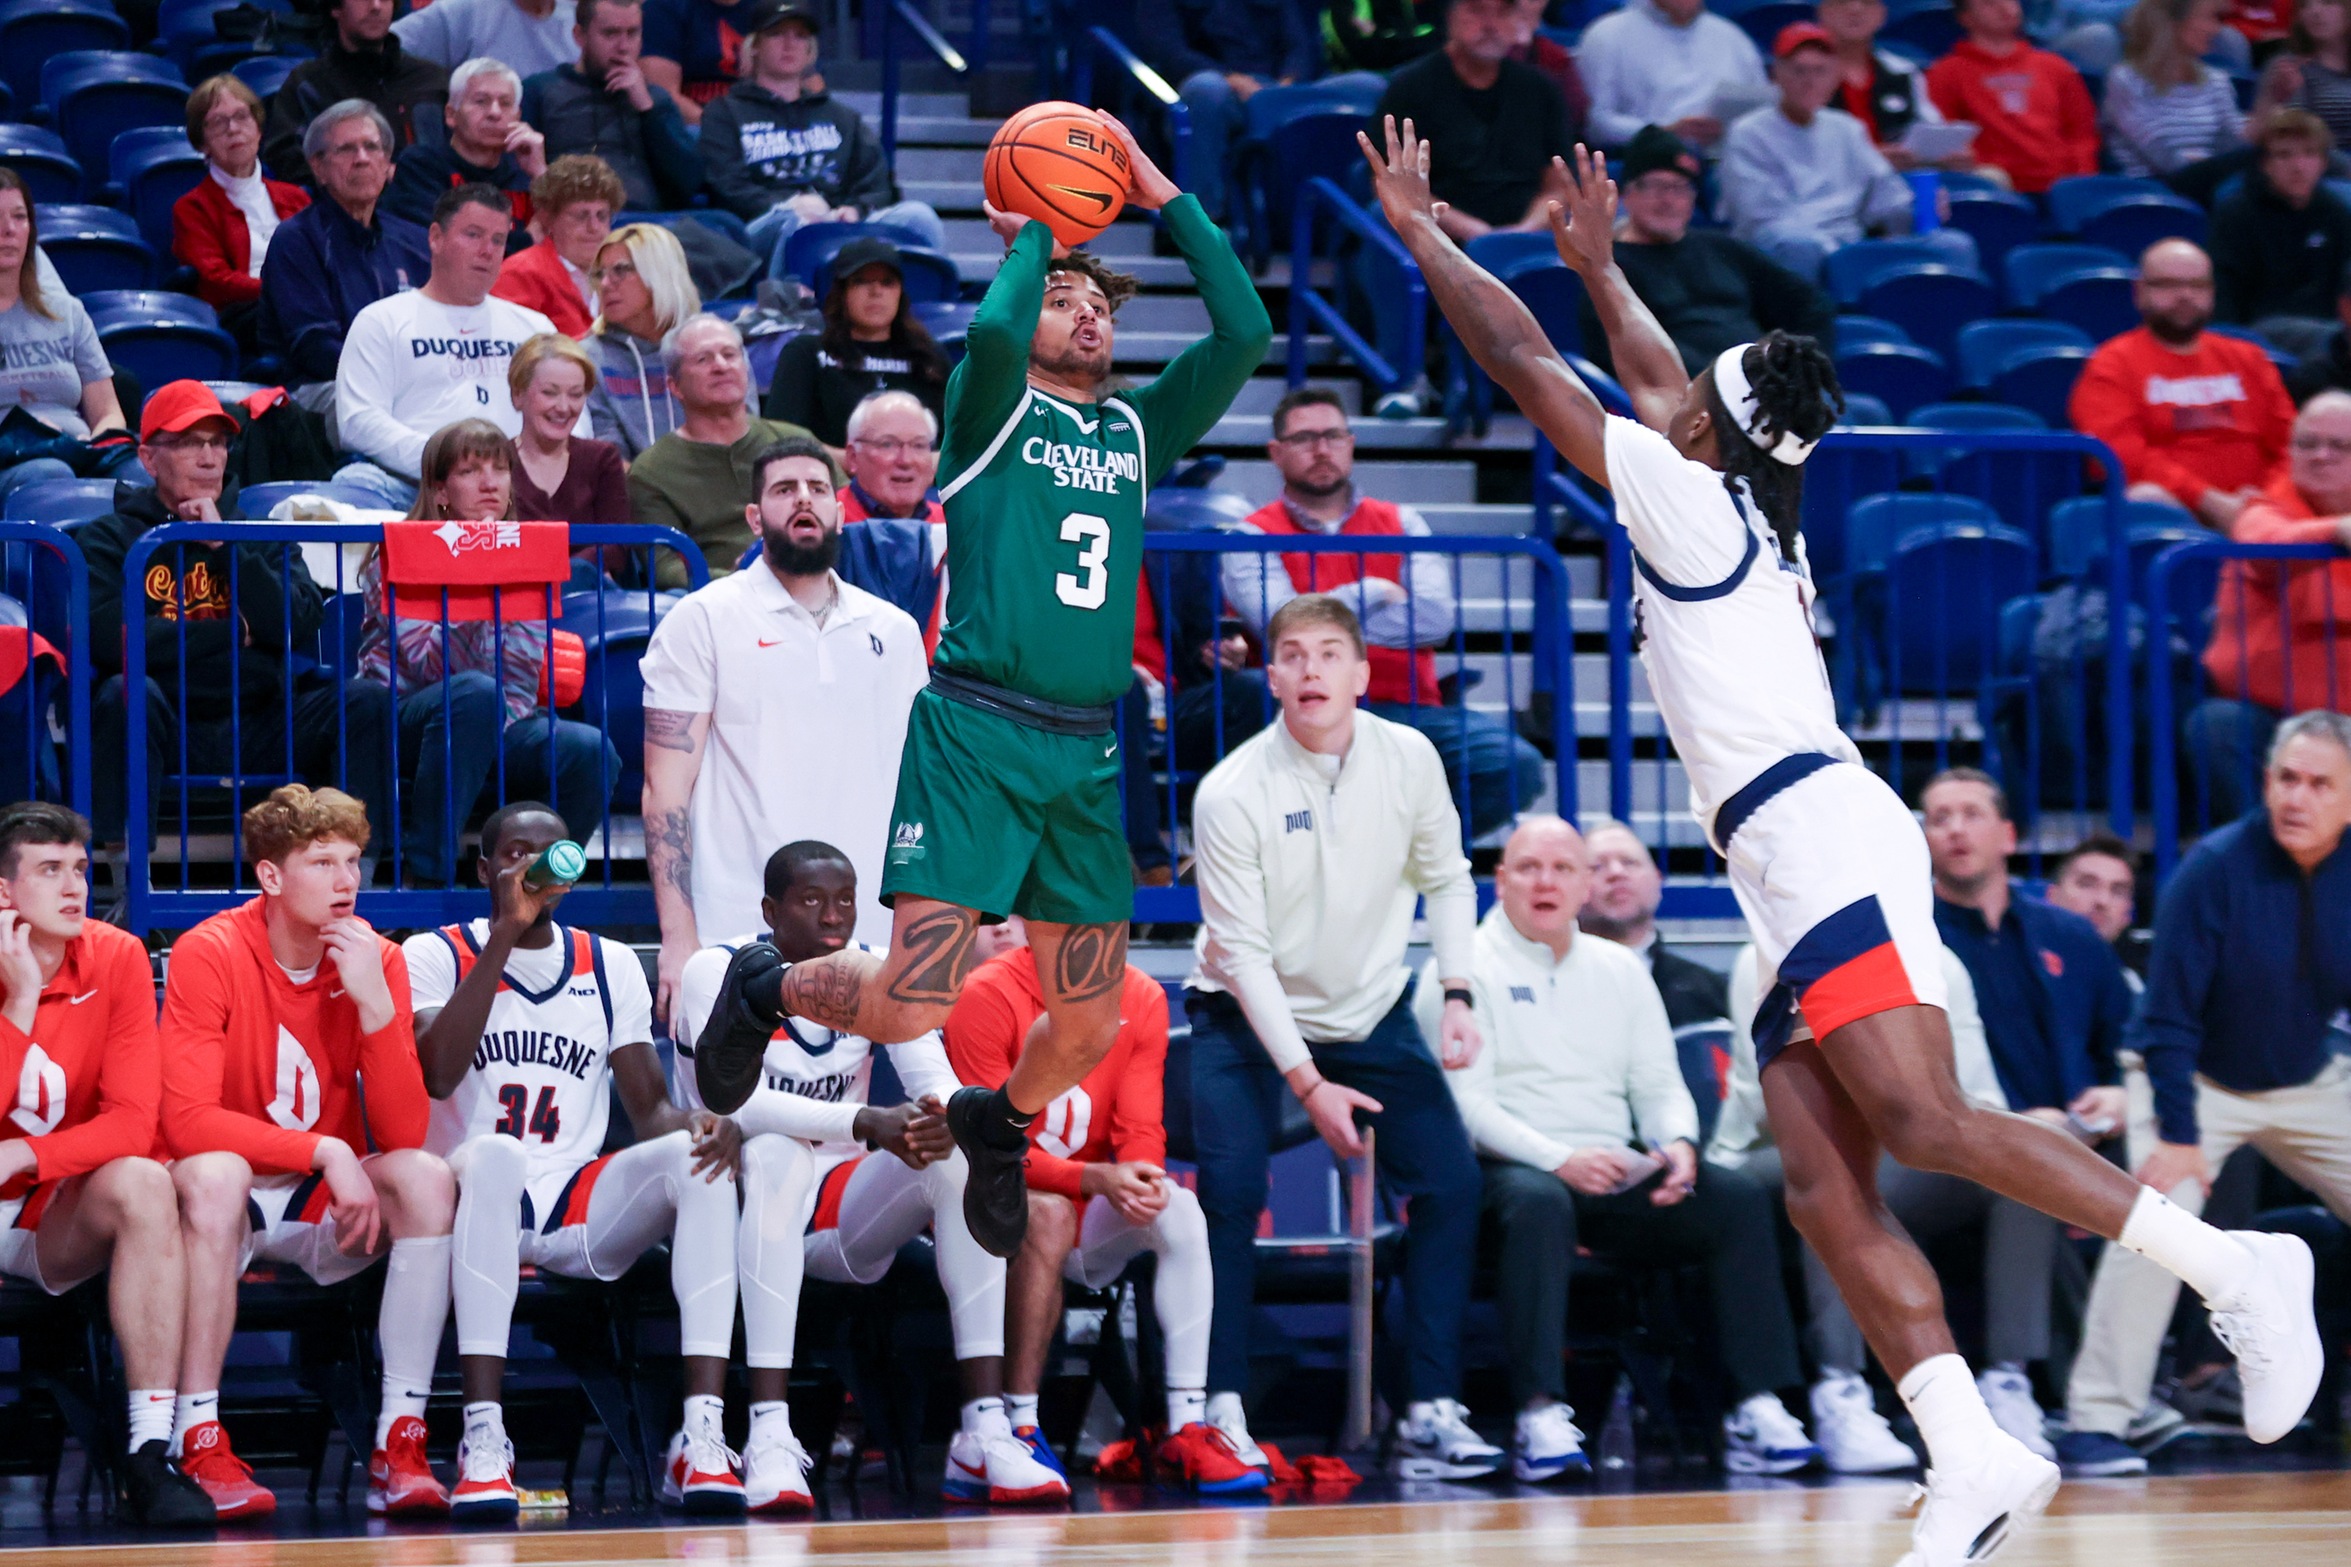 Cleveland State Men’s Basketball Drops Heartbreaker at Duquesne